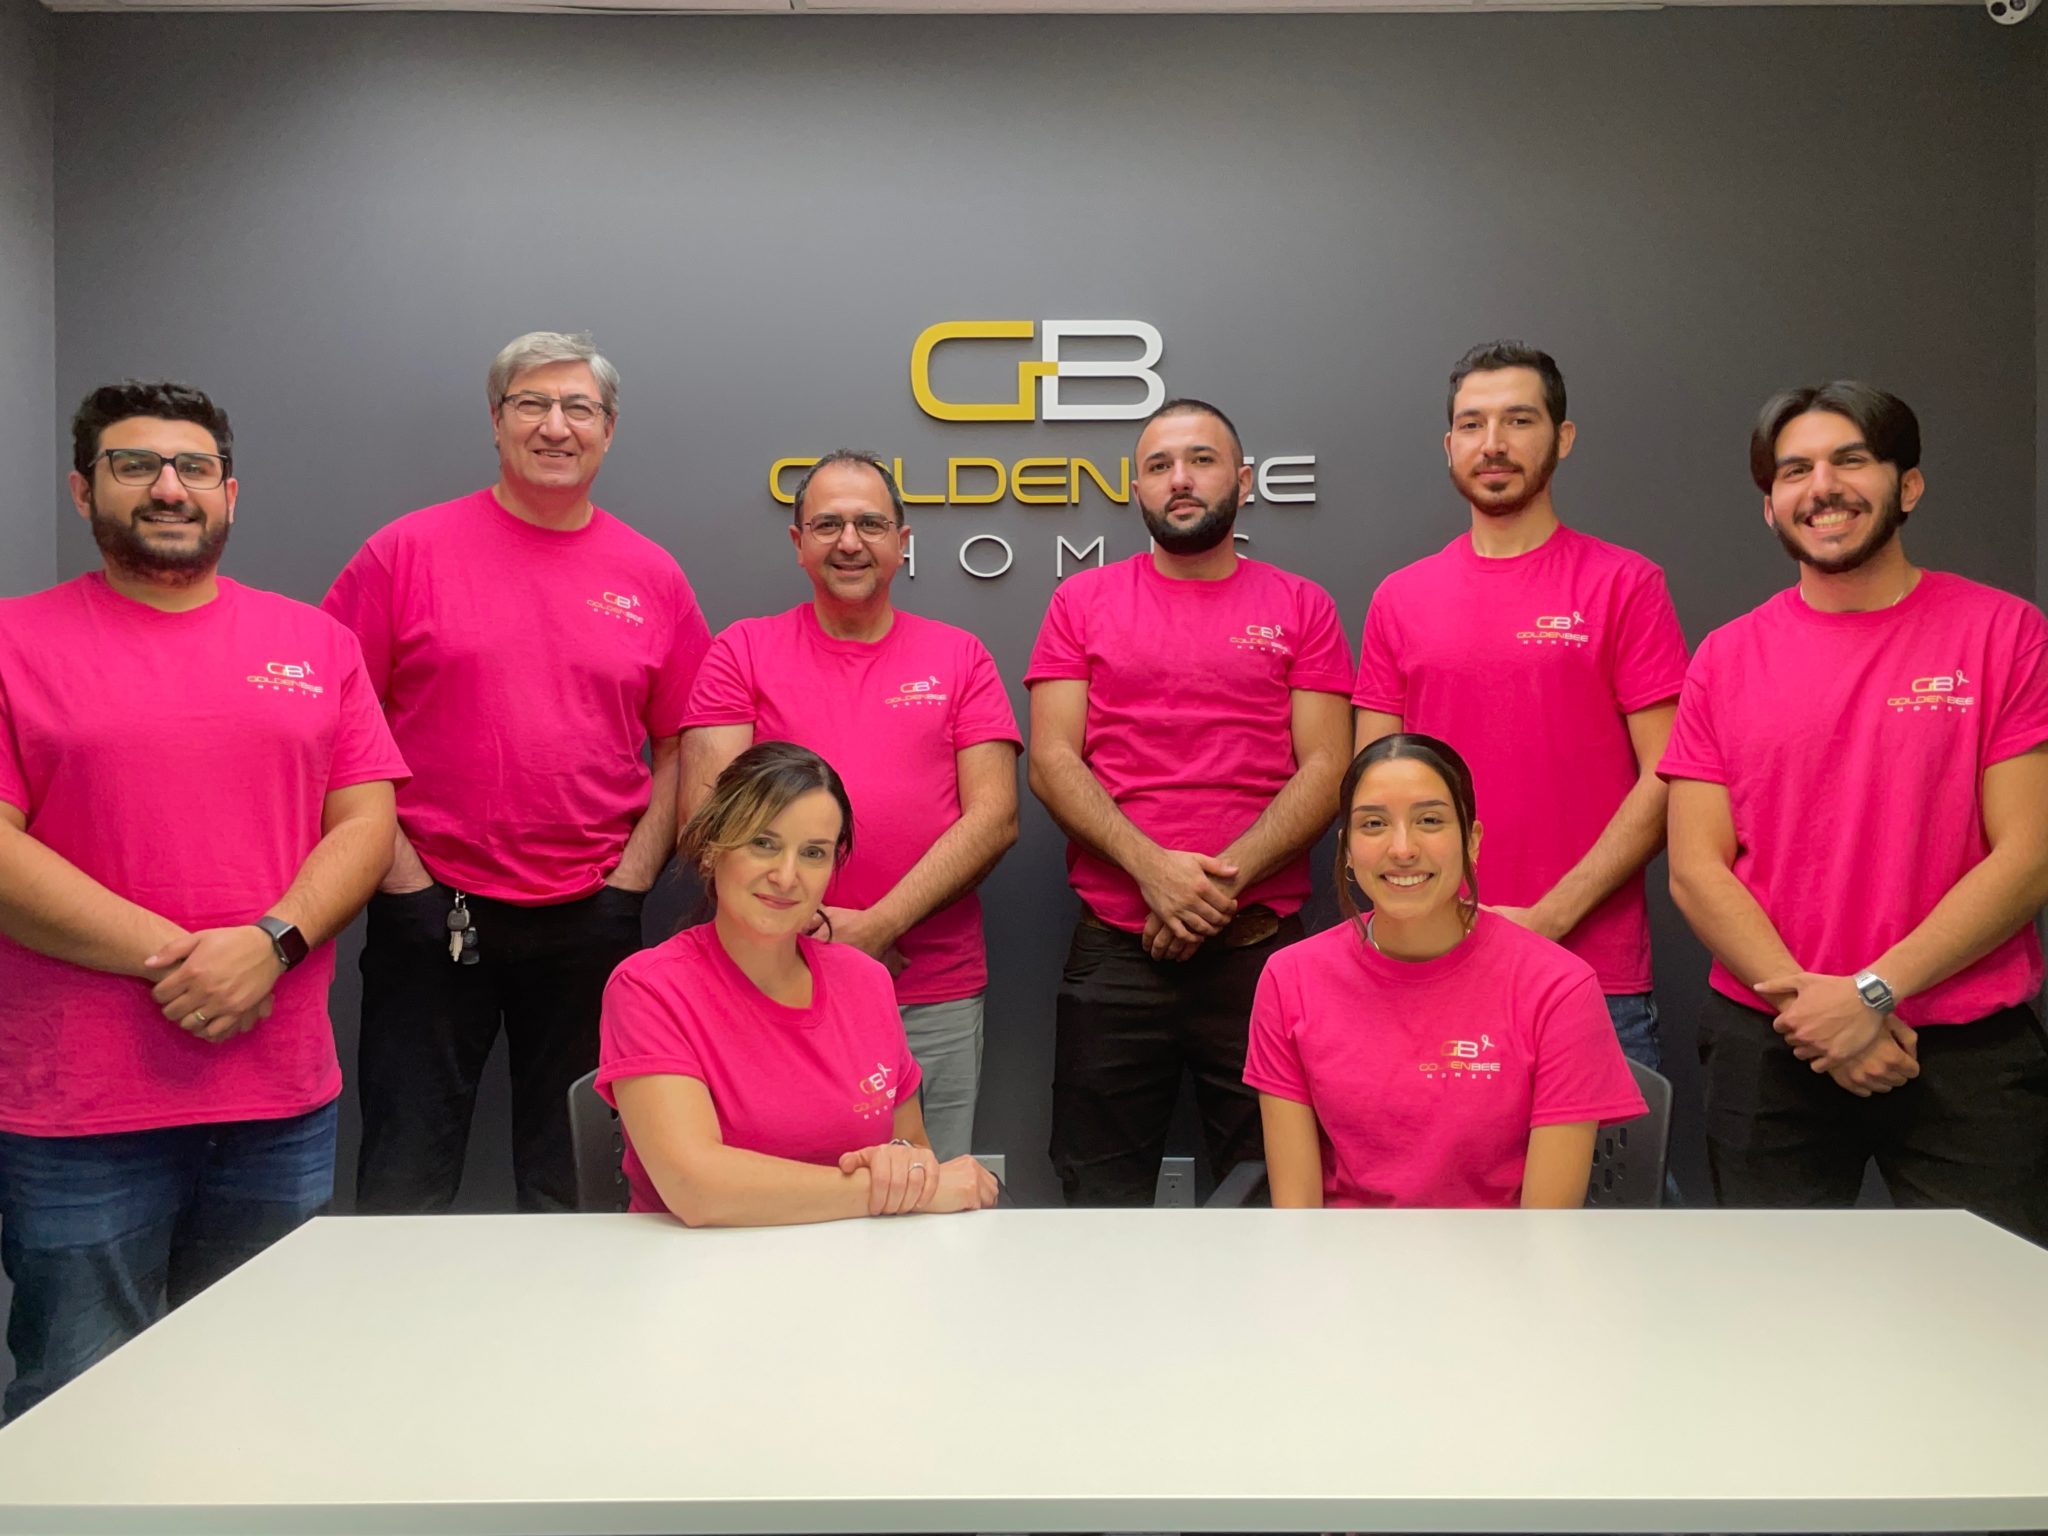 Golden Bee Homes employees standing in front of their logo